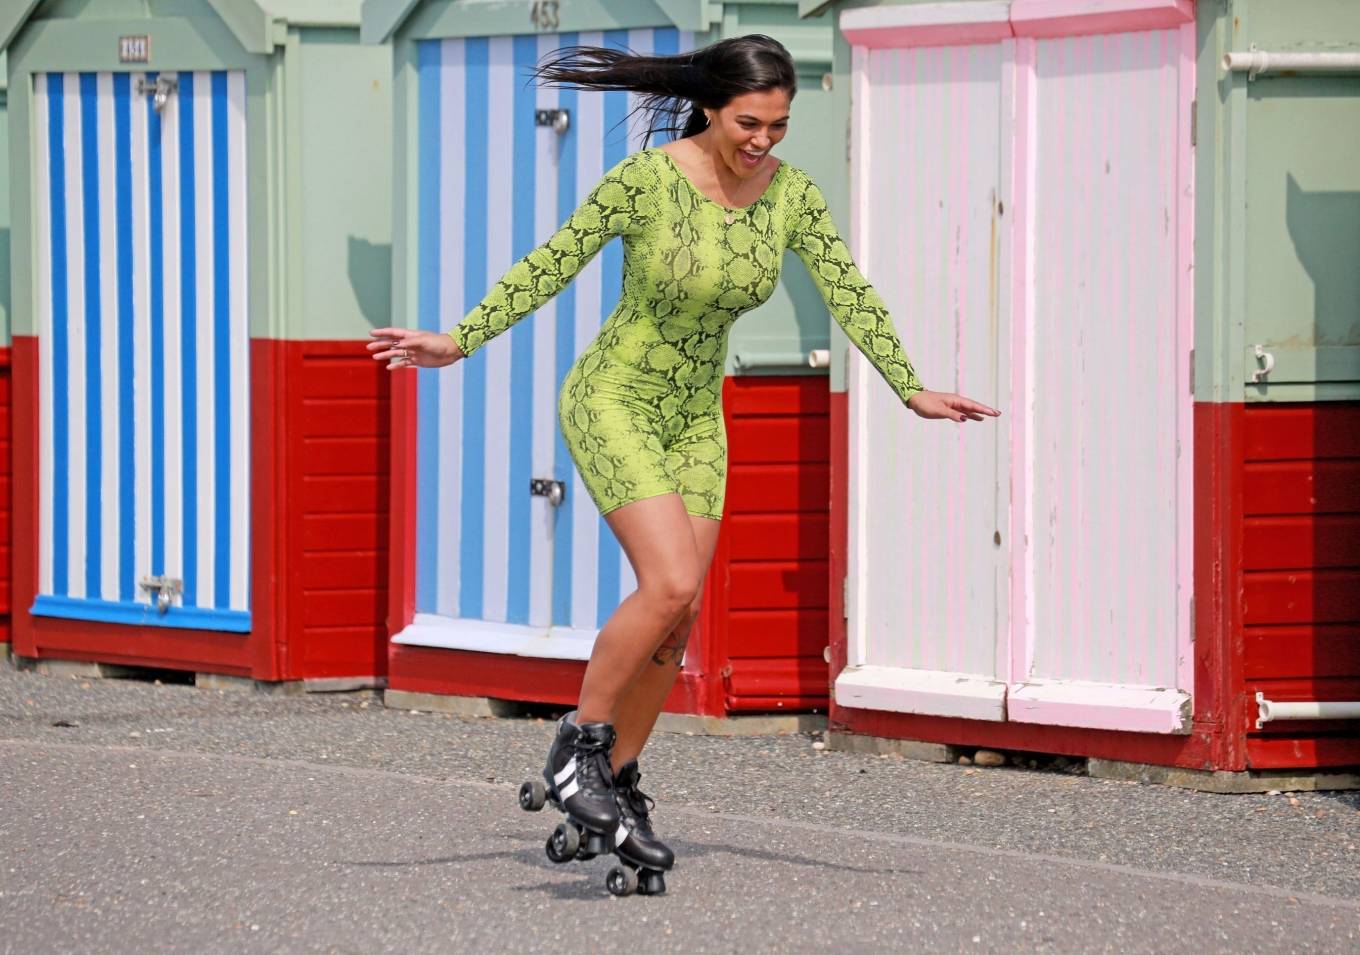 Lydia Clyma 2020 : Lydia Clyma - Rollerblading in a green snakeskin outfit ...